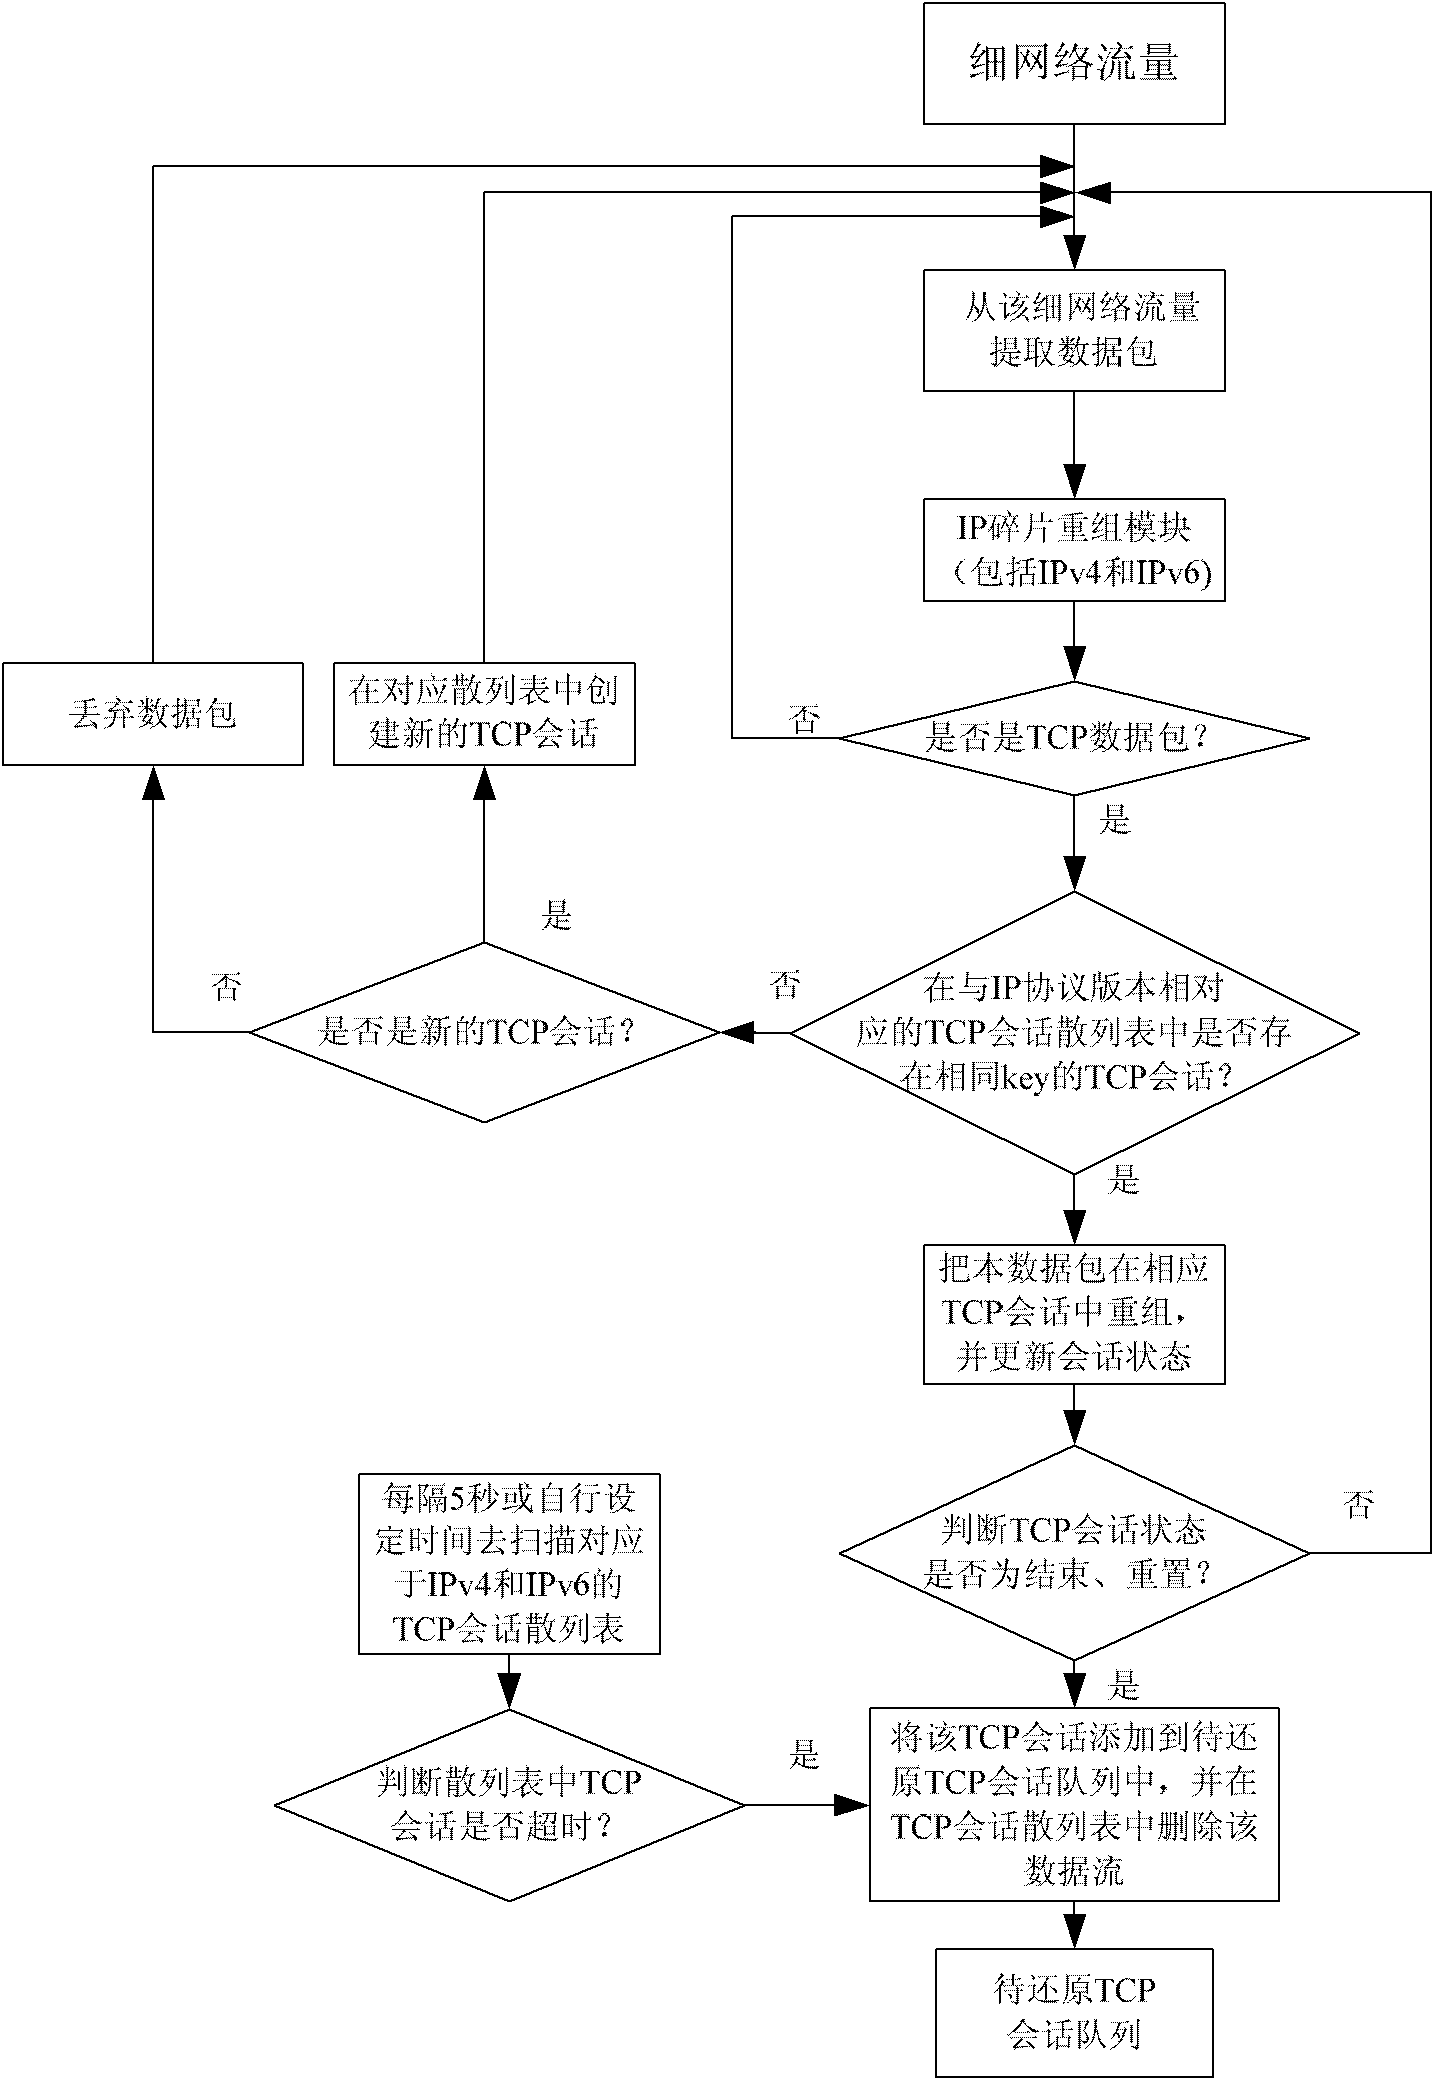 Network flow recovery method